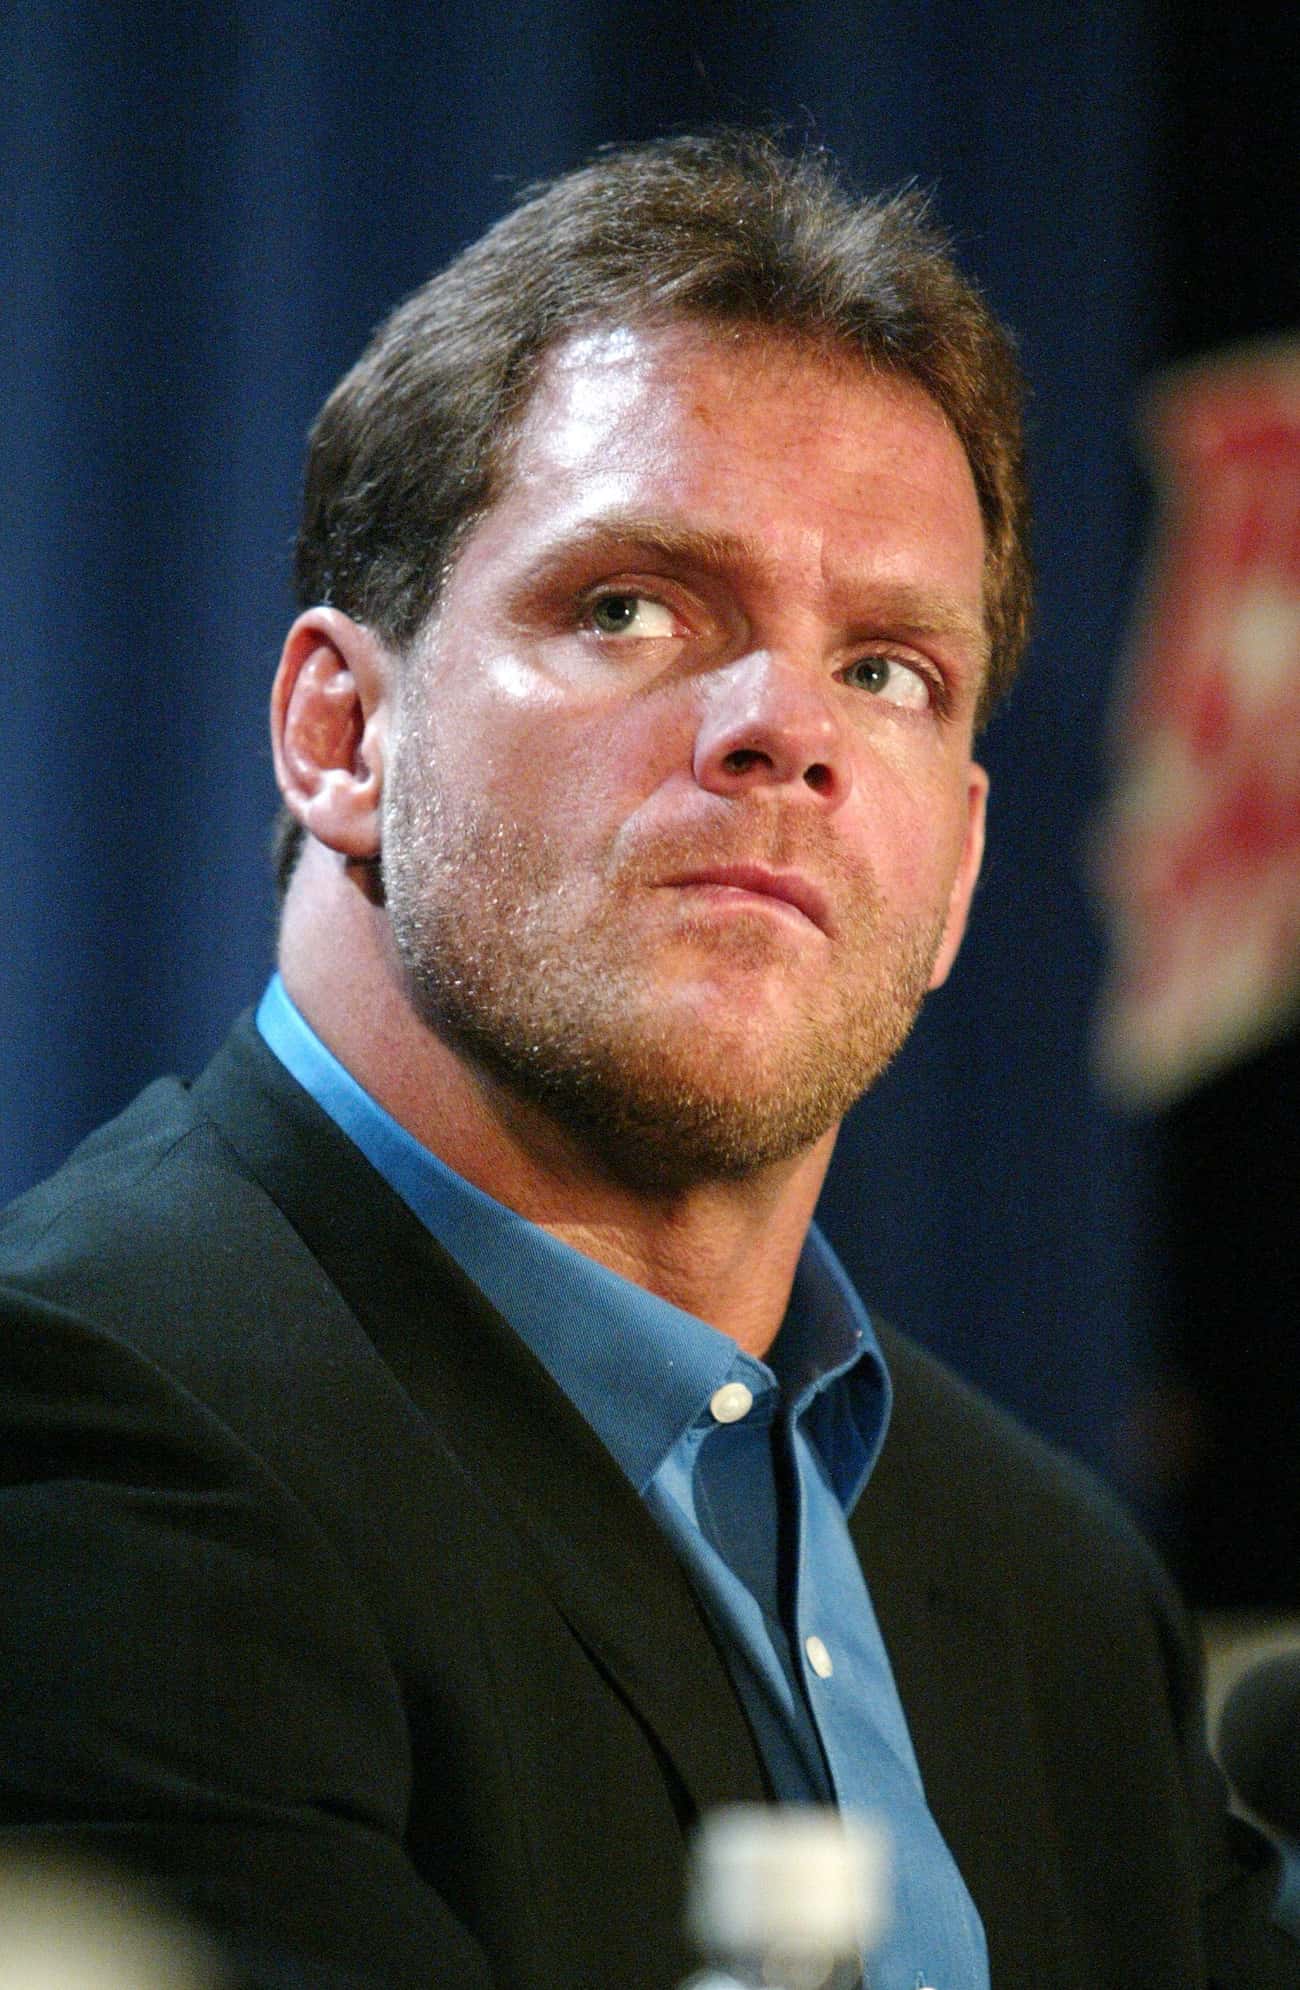 Chris Benoit Murdered His Family, Then Committed Suicide